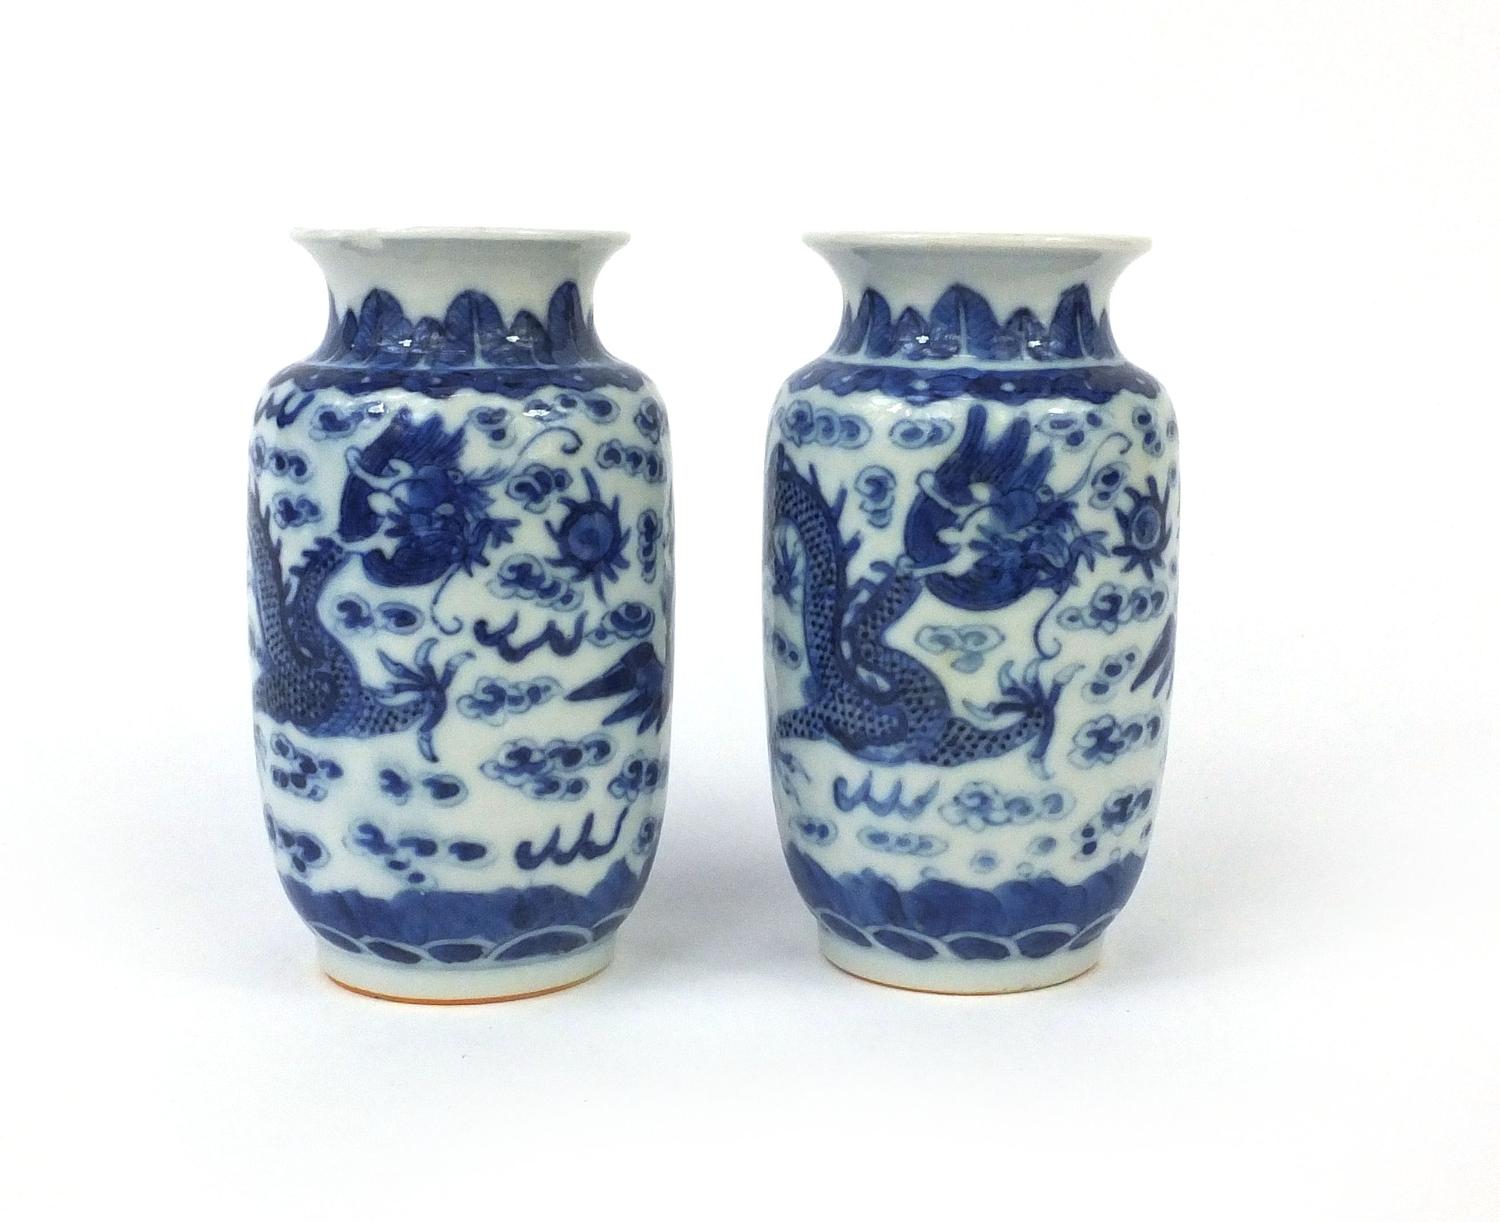 Pair of Chinese blue and white porcelain vases, both hand painted with phoenixes and dragons chasing